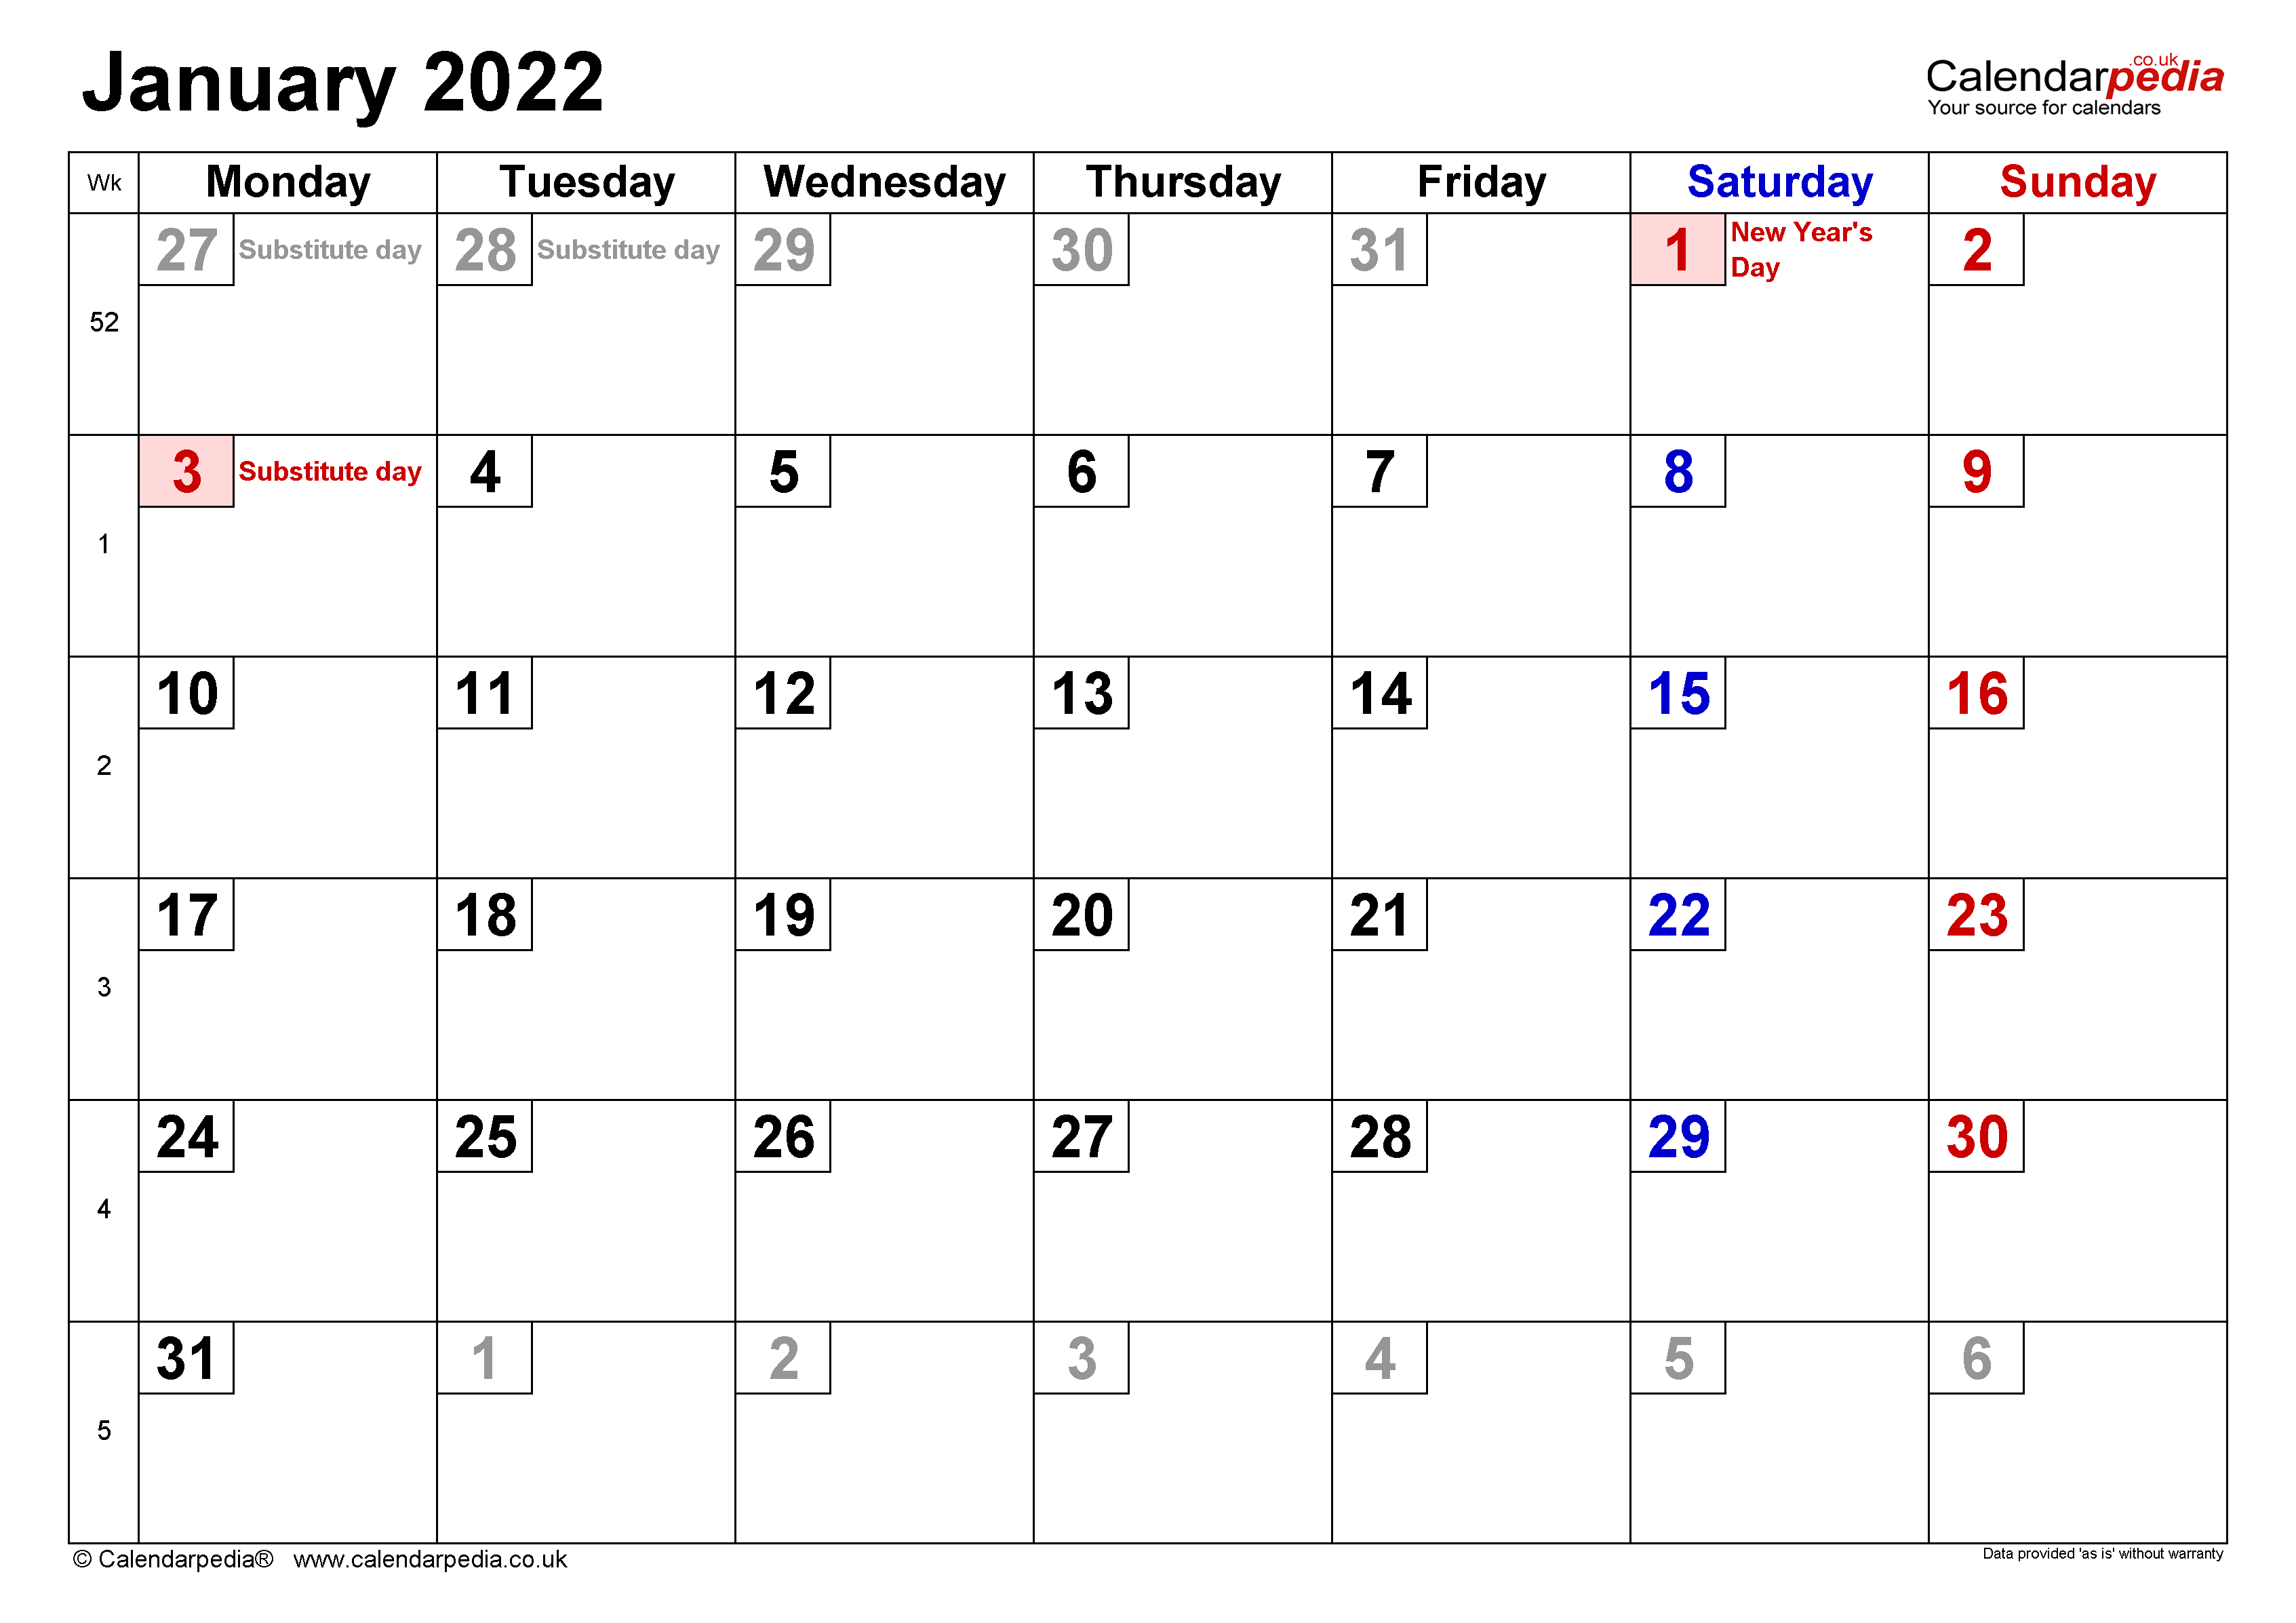 Calendar January 2022 (UK) with Excel, Word and PDF templates